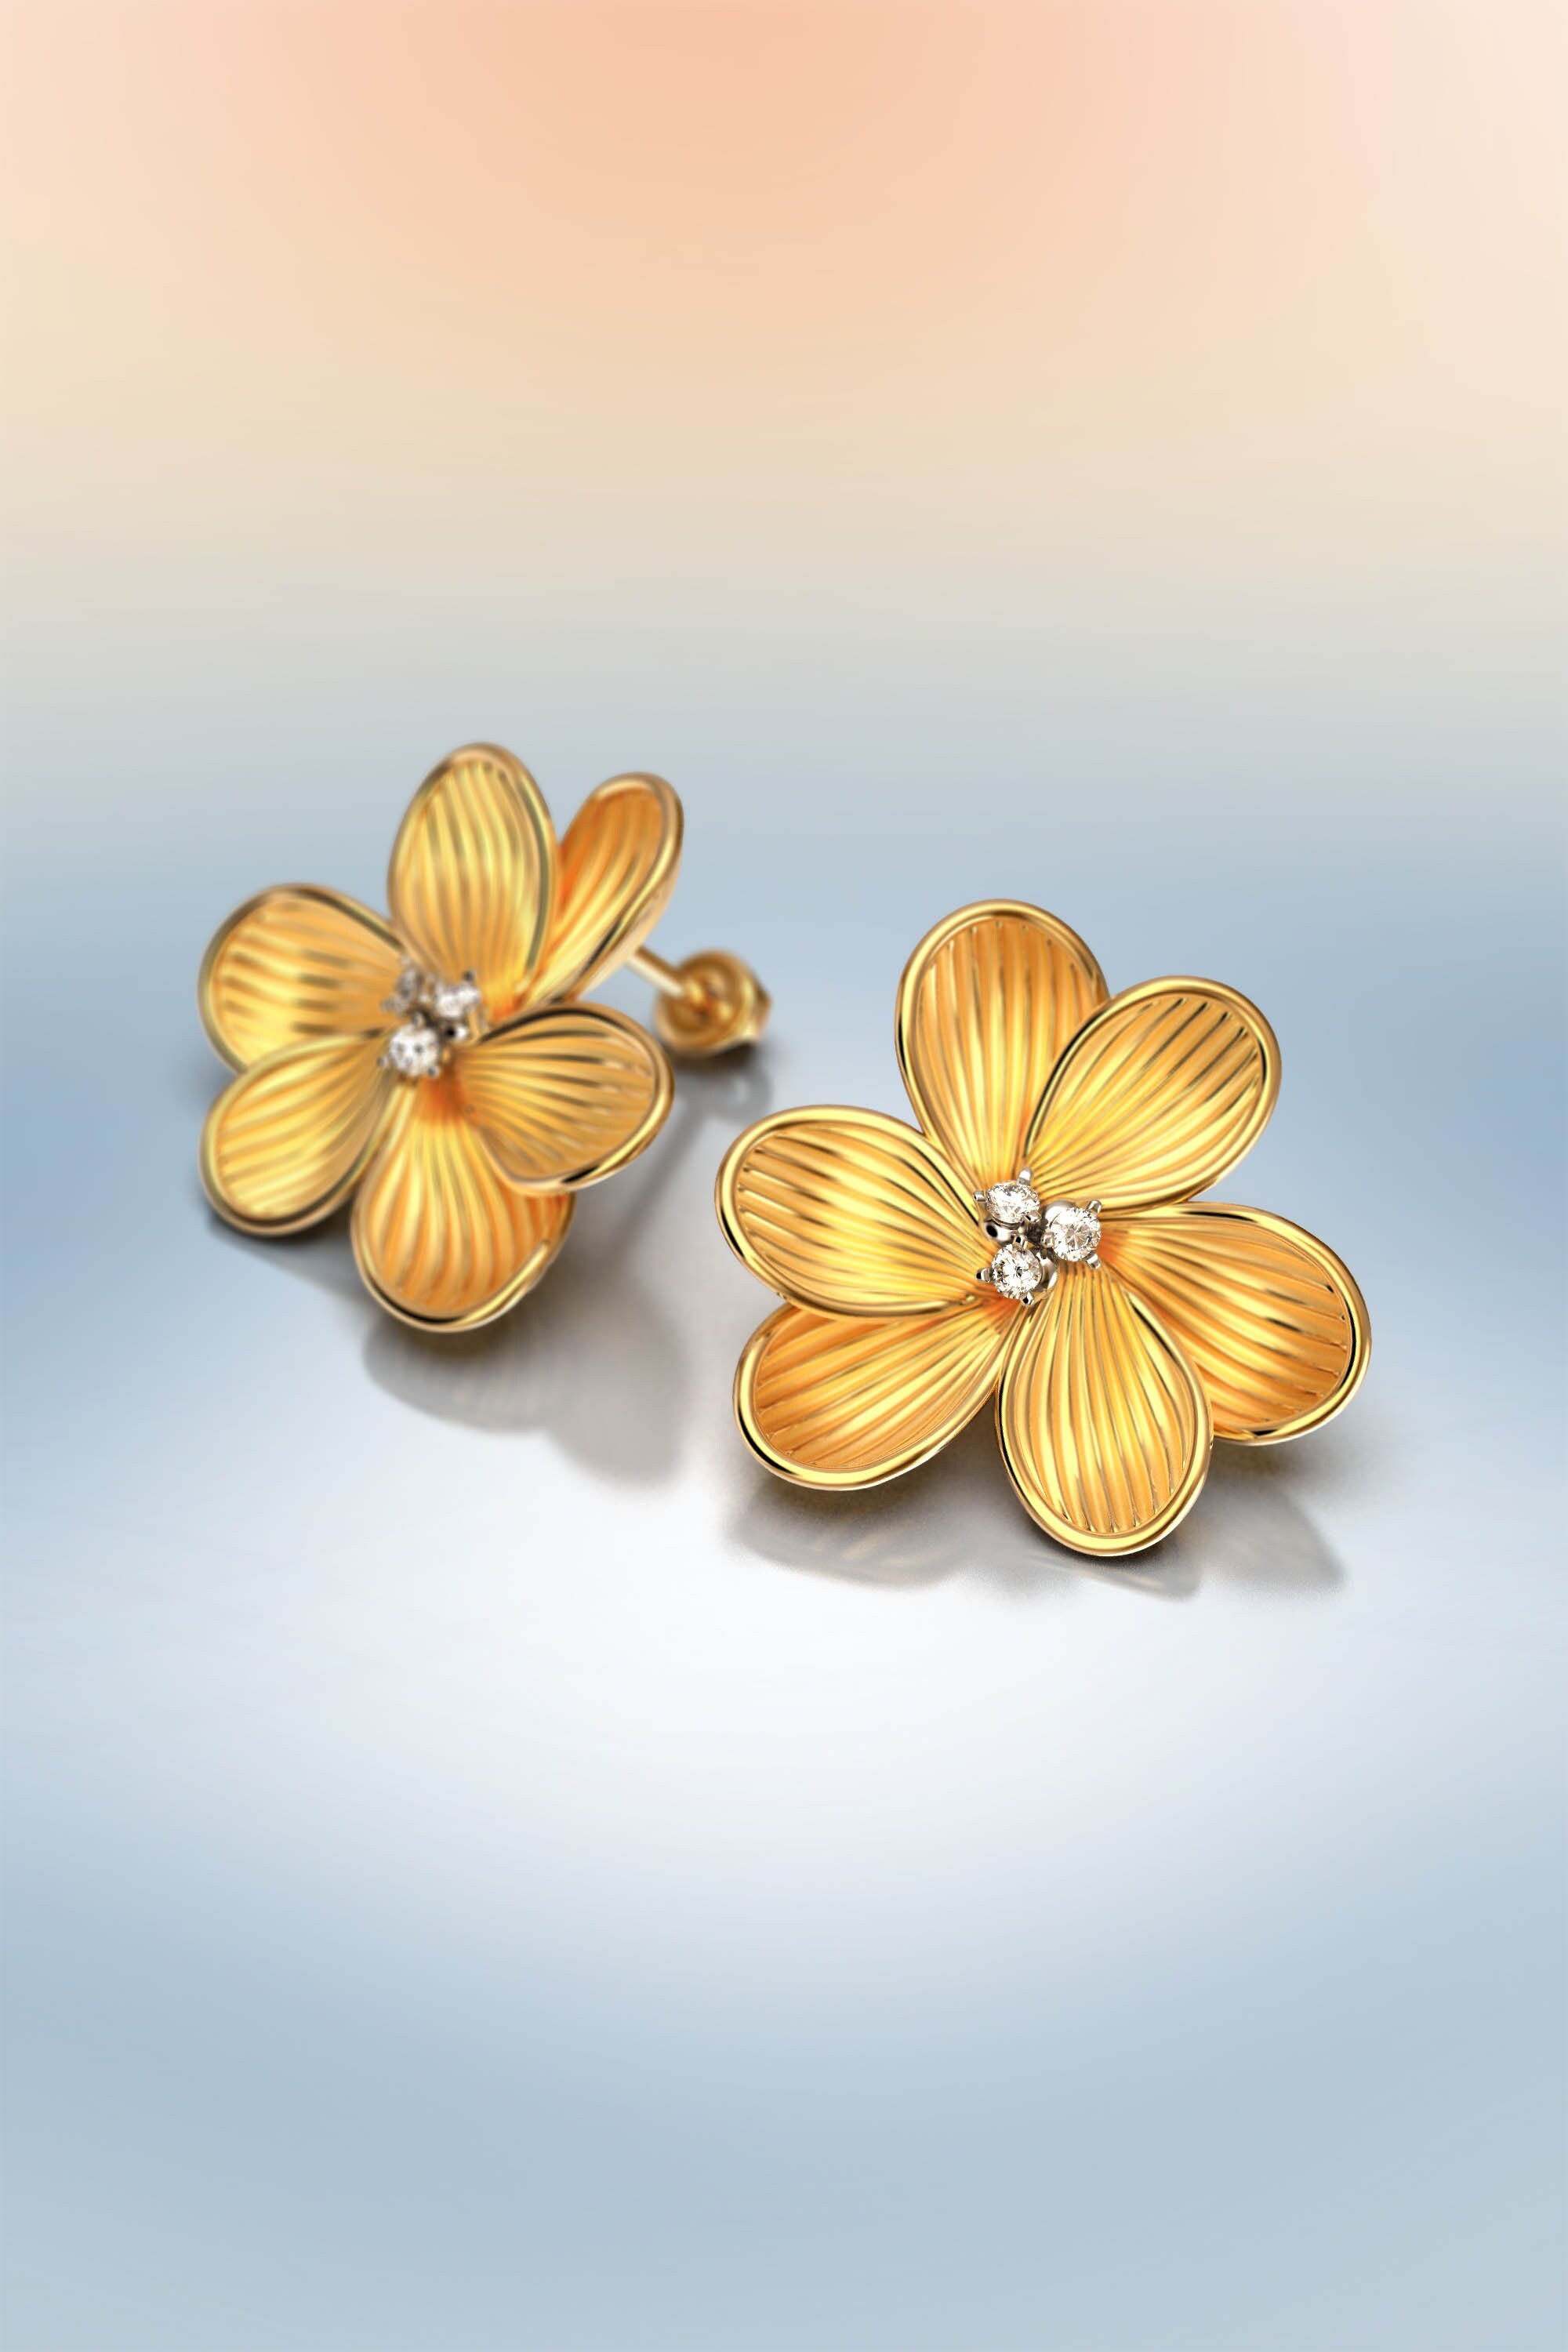 18K Gold Earrings, 18 Or 14K Solid Earrings Made in Italy. Real With Natural Diamonds. Italian Fine Jewelry